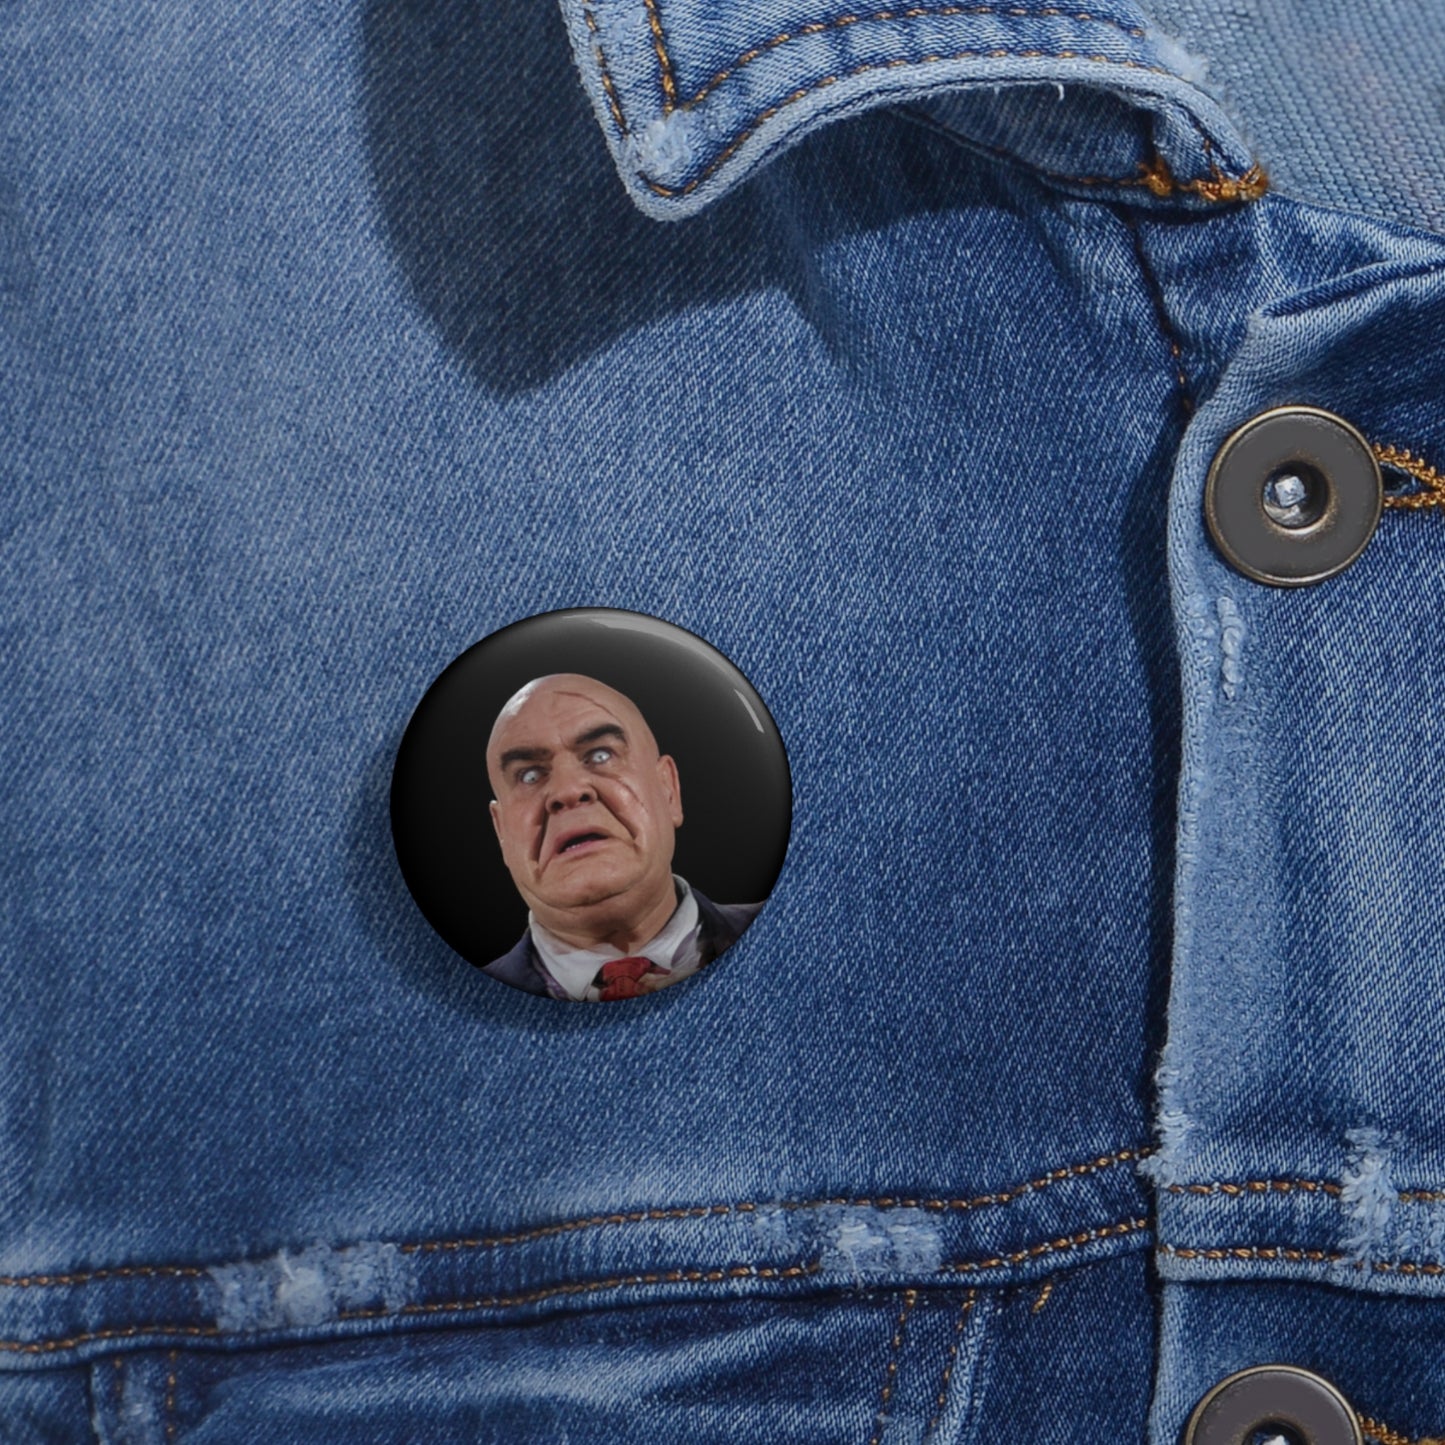 Tor Johnson - Plan 9 from Outer Space - Classic TV & Film Pin Buttons